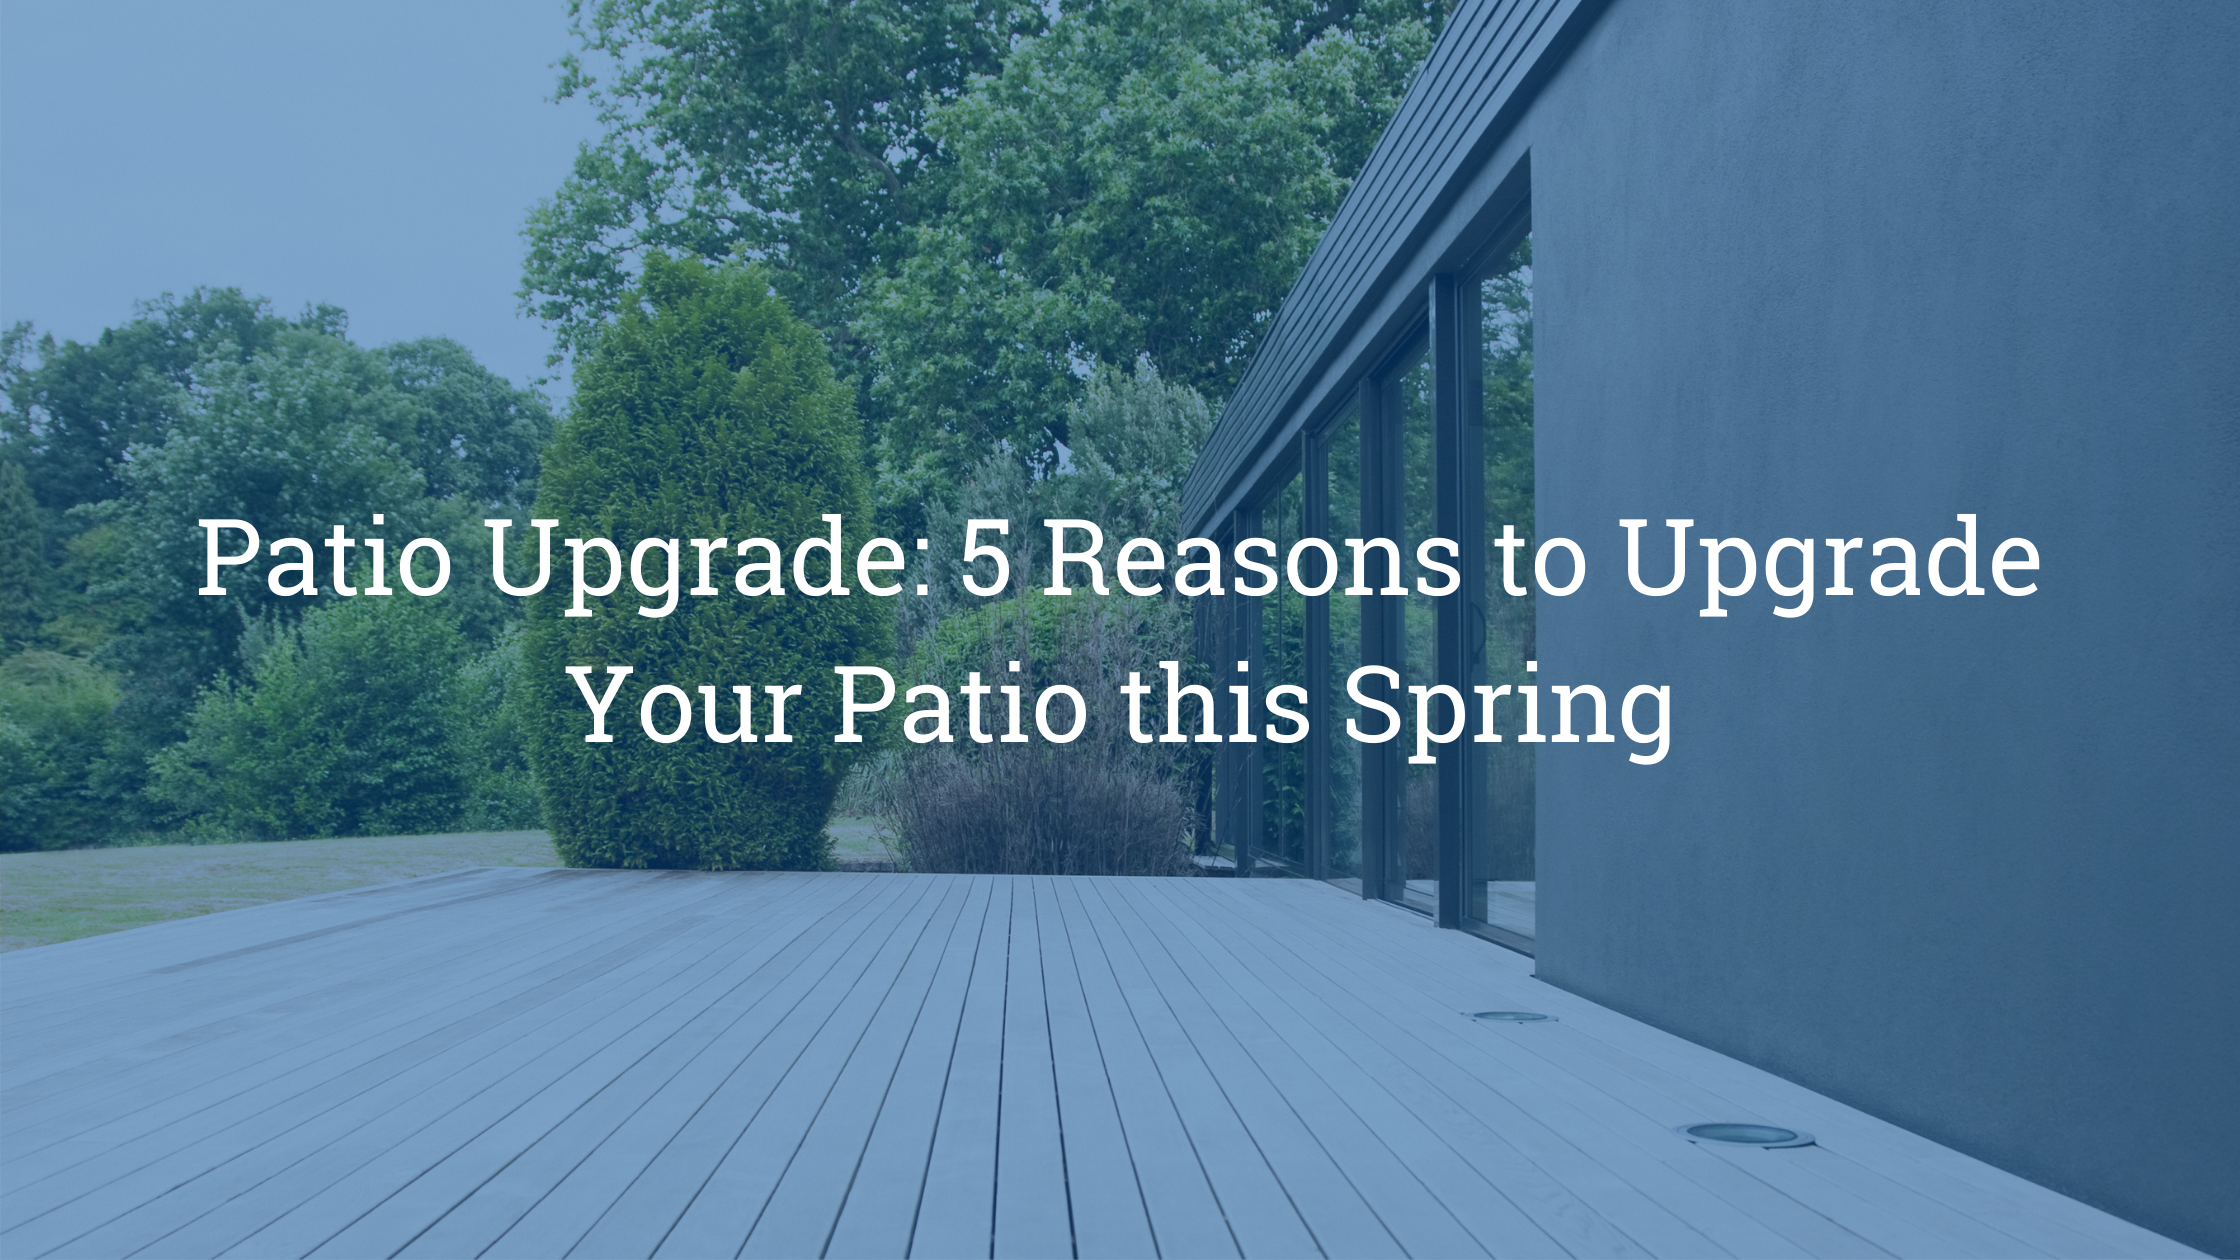 https://www.handymanconnection.net/wp-content/uploads/2021/05/Patio-Upgrade_-5-Reasons-to-Upgrade-Your-Patio-this-Spring-1.png